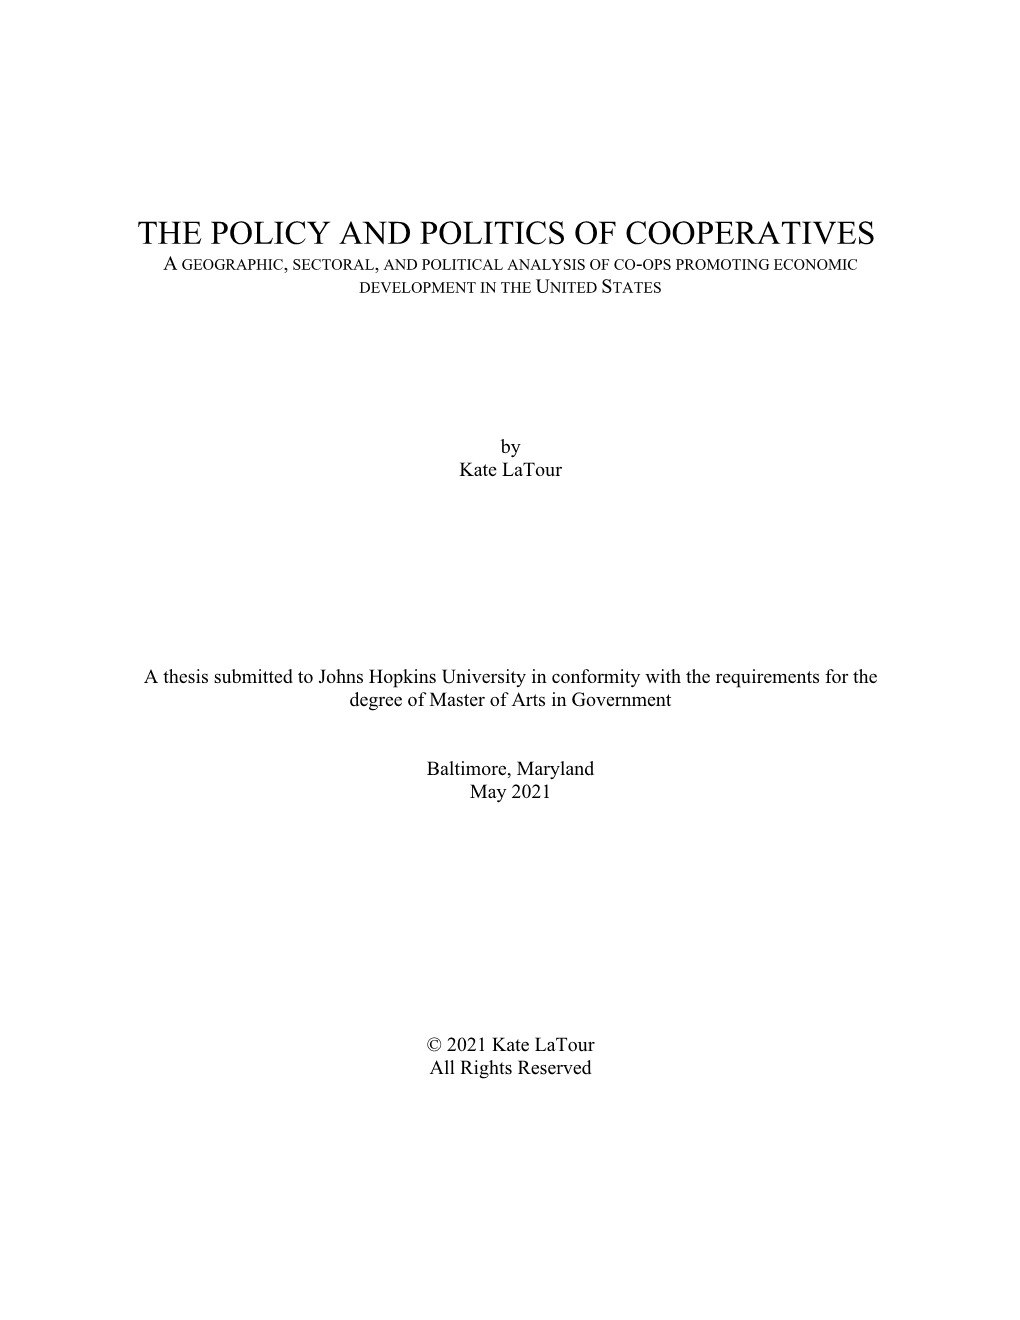 The Policy and Politics of Cooperatives a Geographic, Sectoral, and Political Analysis of Co-Ops Promoting Economic Development in the United States